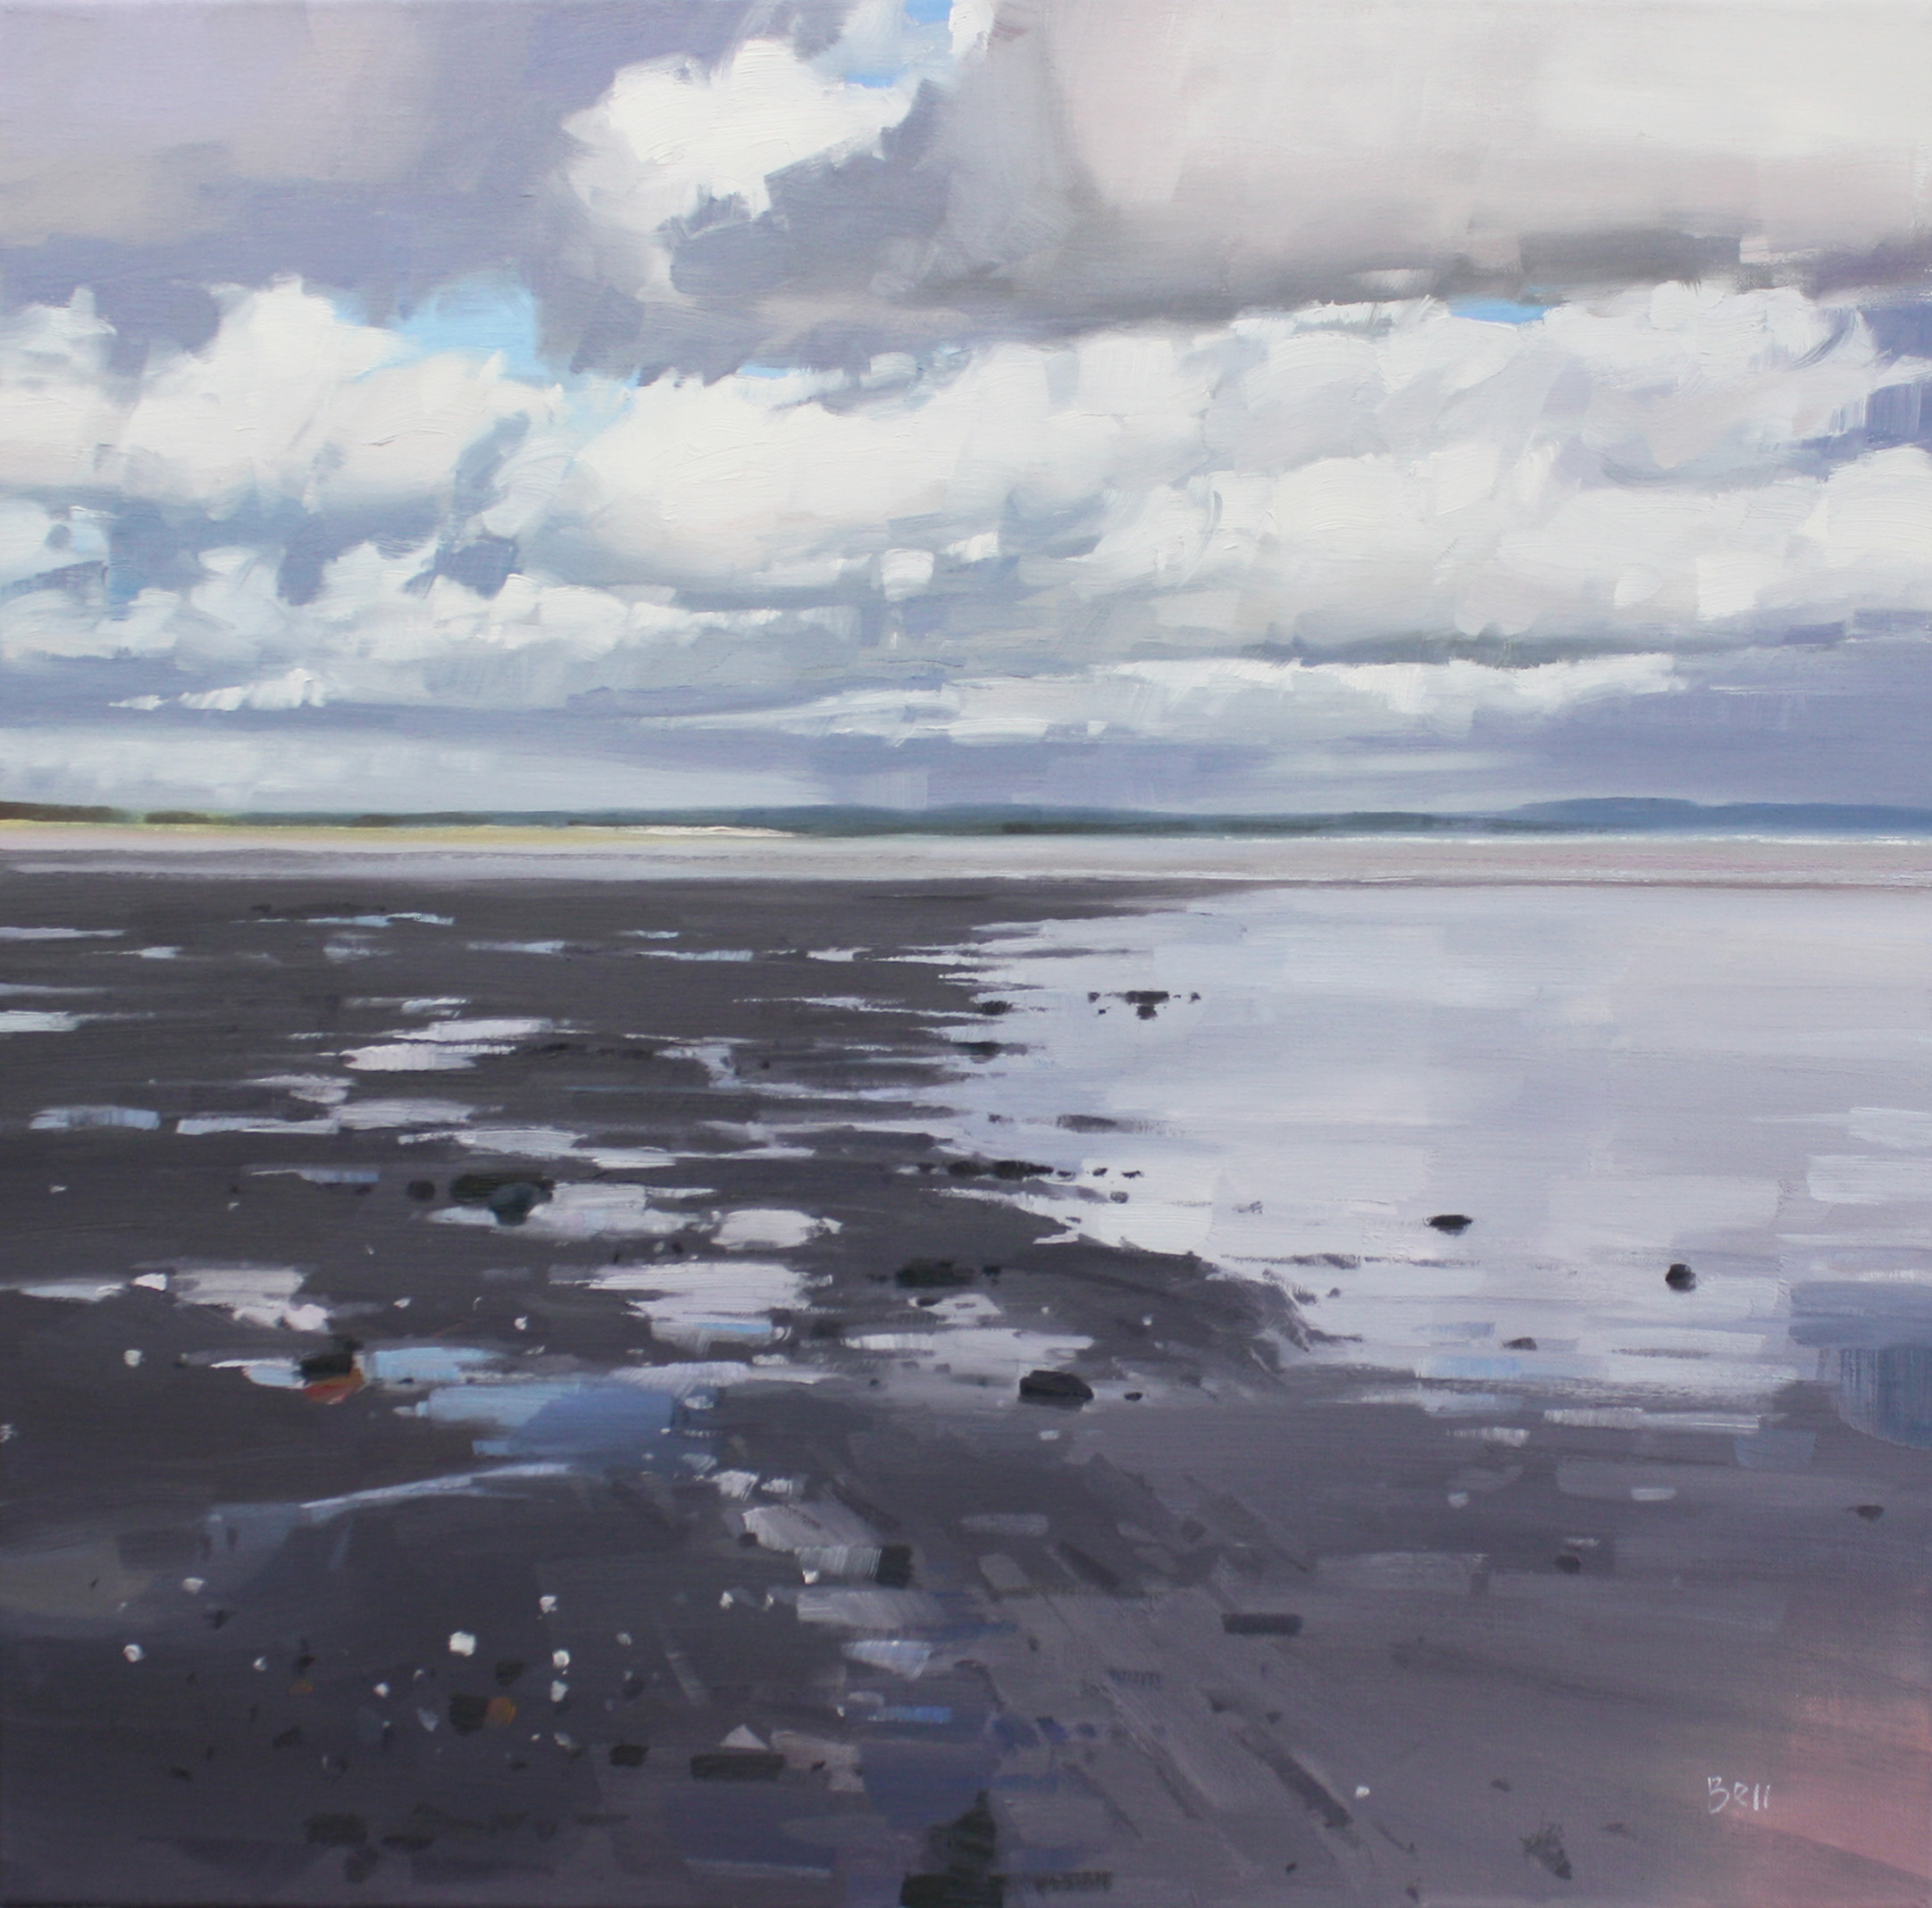 'Pools and Rocks on Luce Bay' by artist John Bell